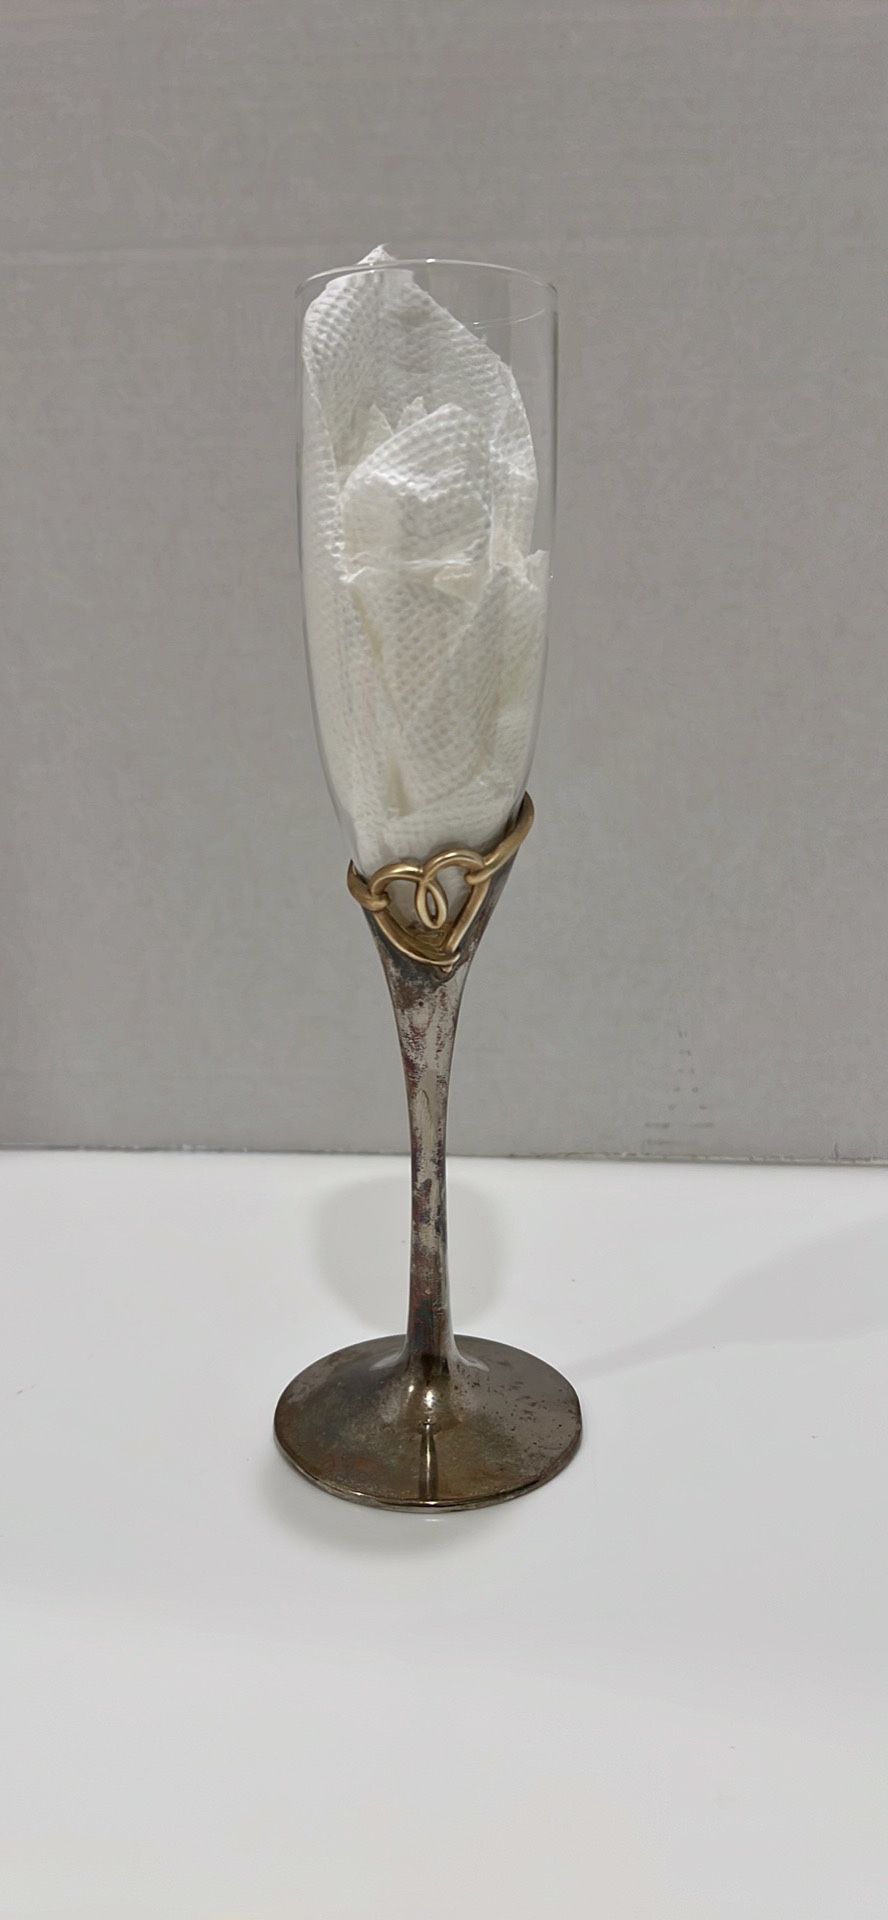 Lenox Forevermore Flute Champaign Glass Silverplated